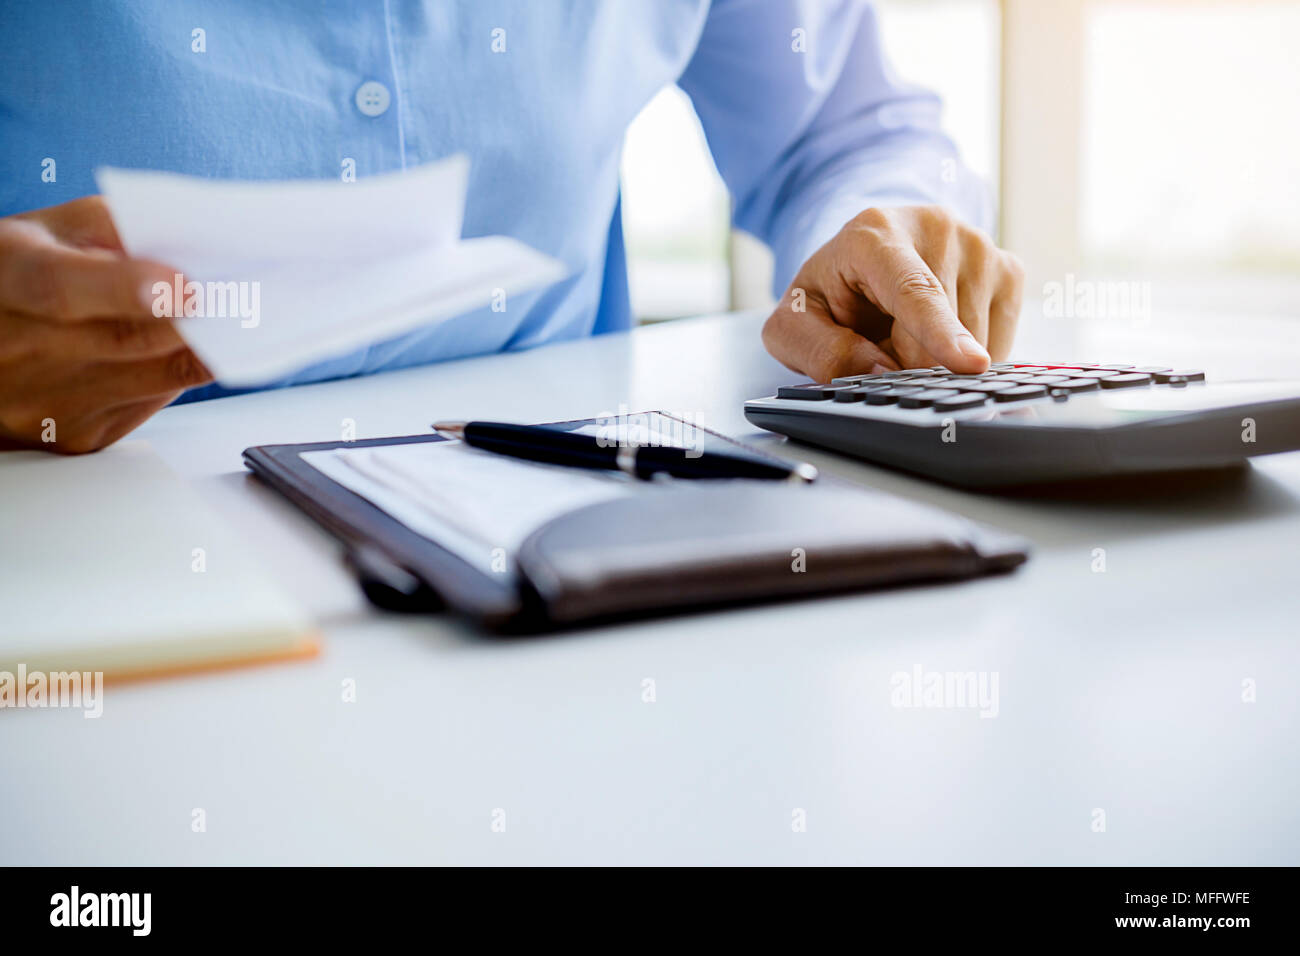 Woman with bills and calculator. Woman using calculator to calculate bills at the table in office. Calculation of costs. Stock Photo